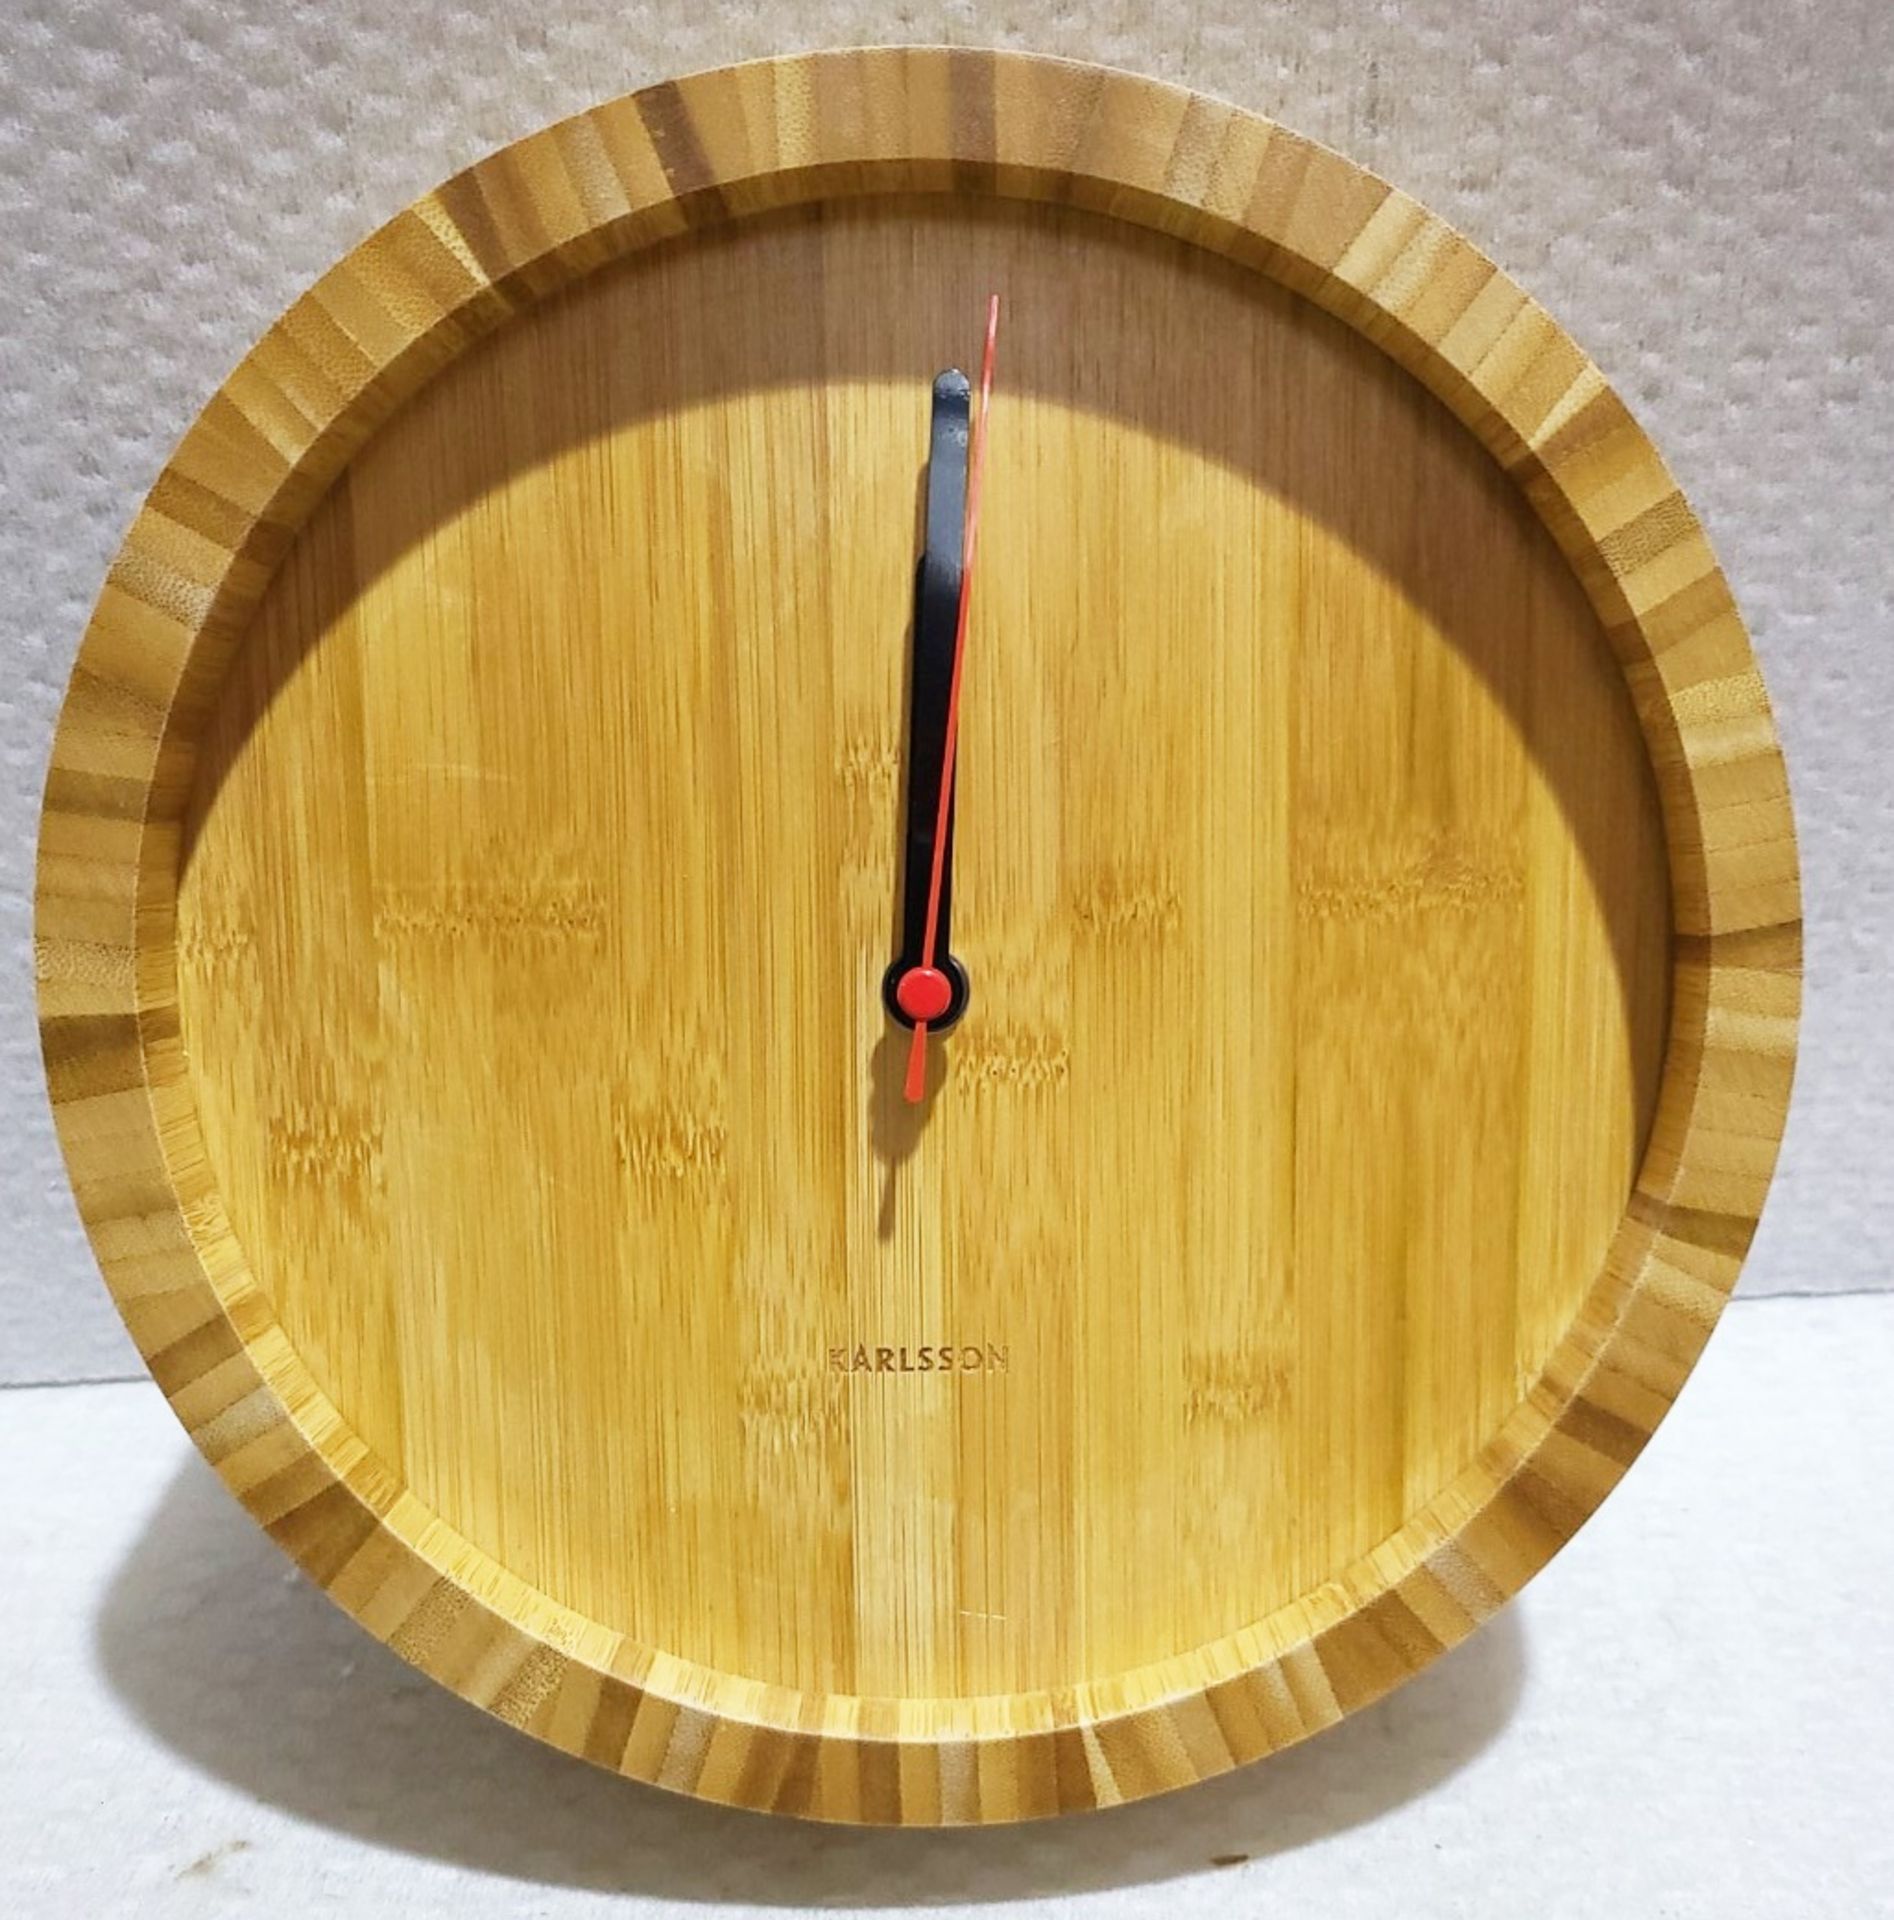 1 x KARLSSON Tom Bamboo Natural Numberless Wall Clock 26cm - New Boxed Stock - Image 6 of 7